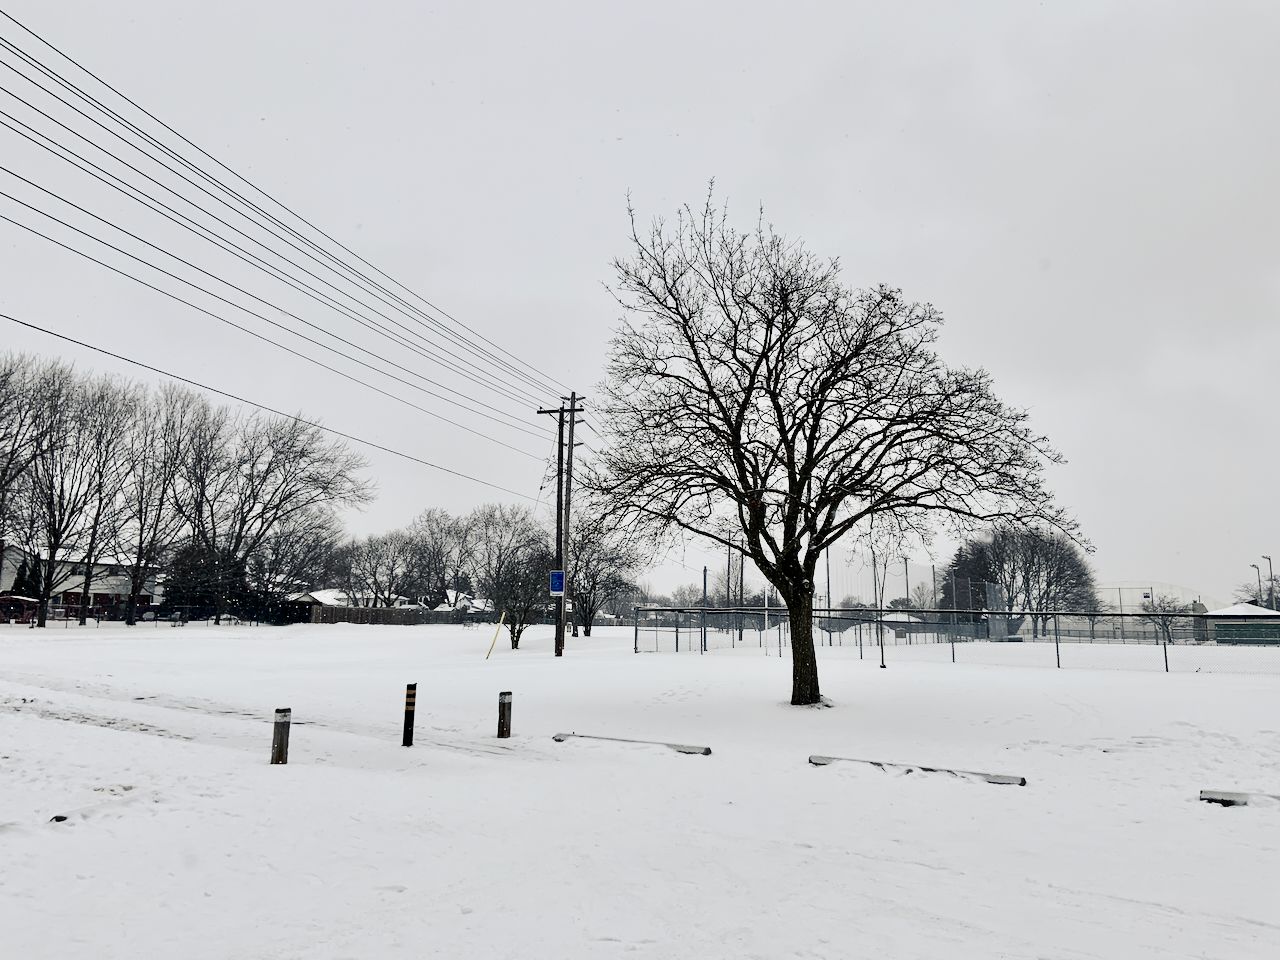 A leafless maple tree on a snow-covered ground